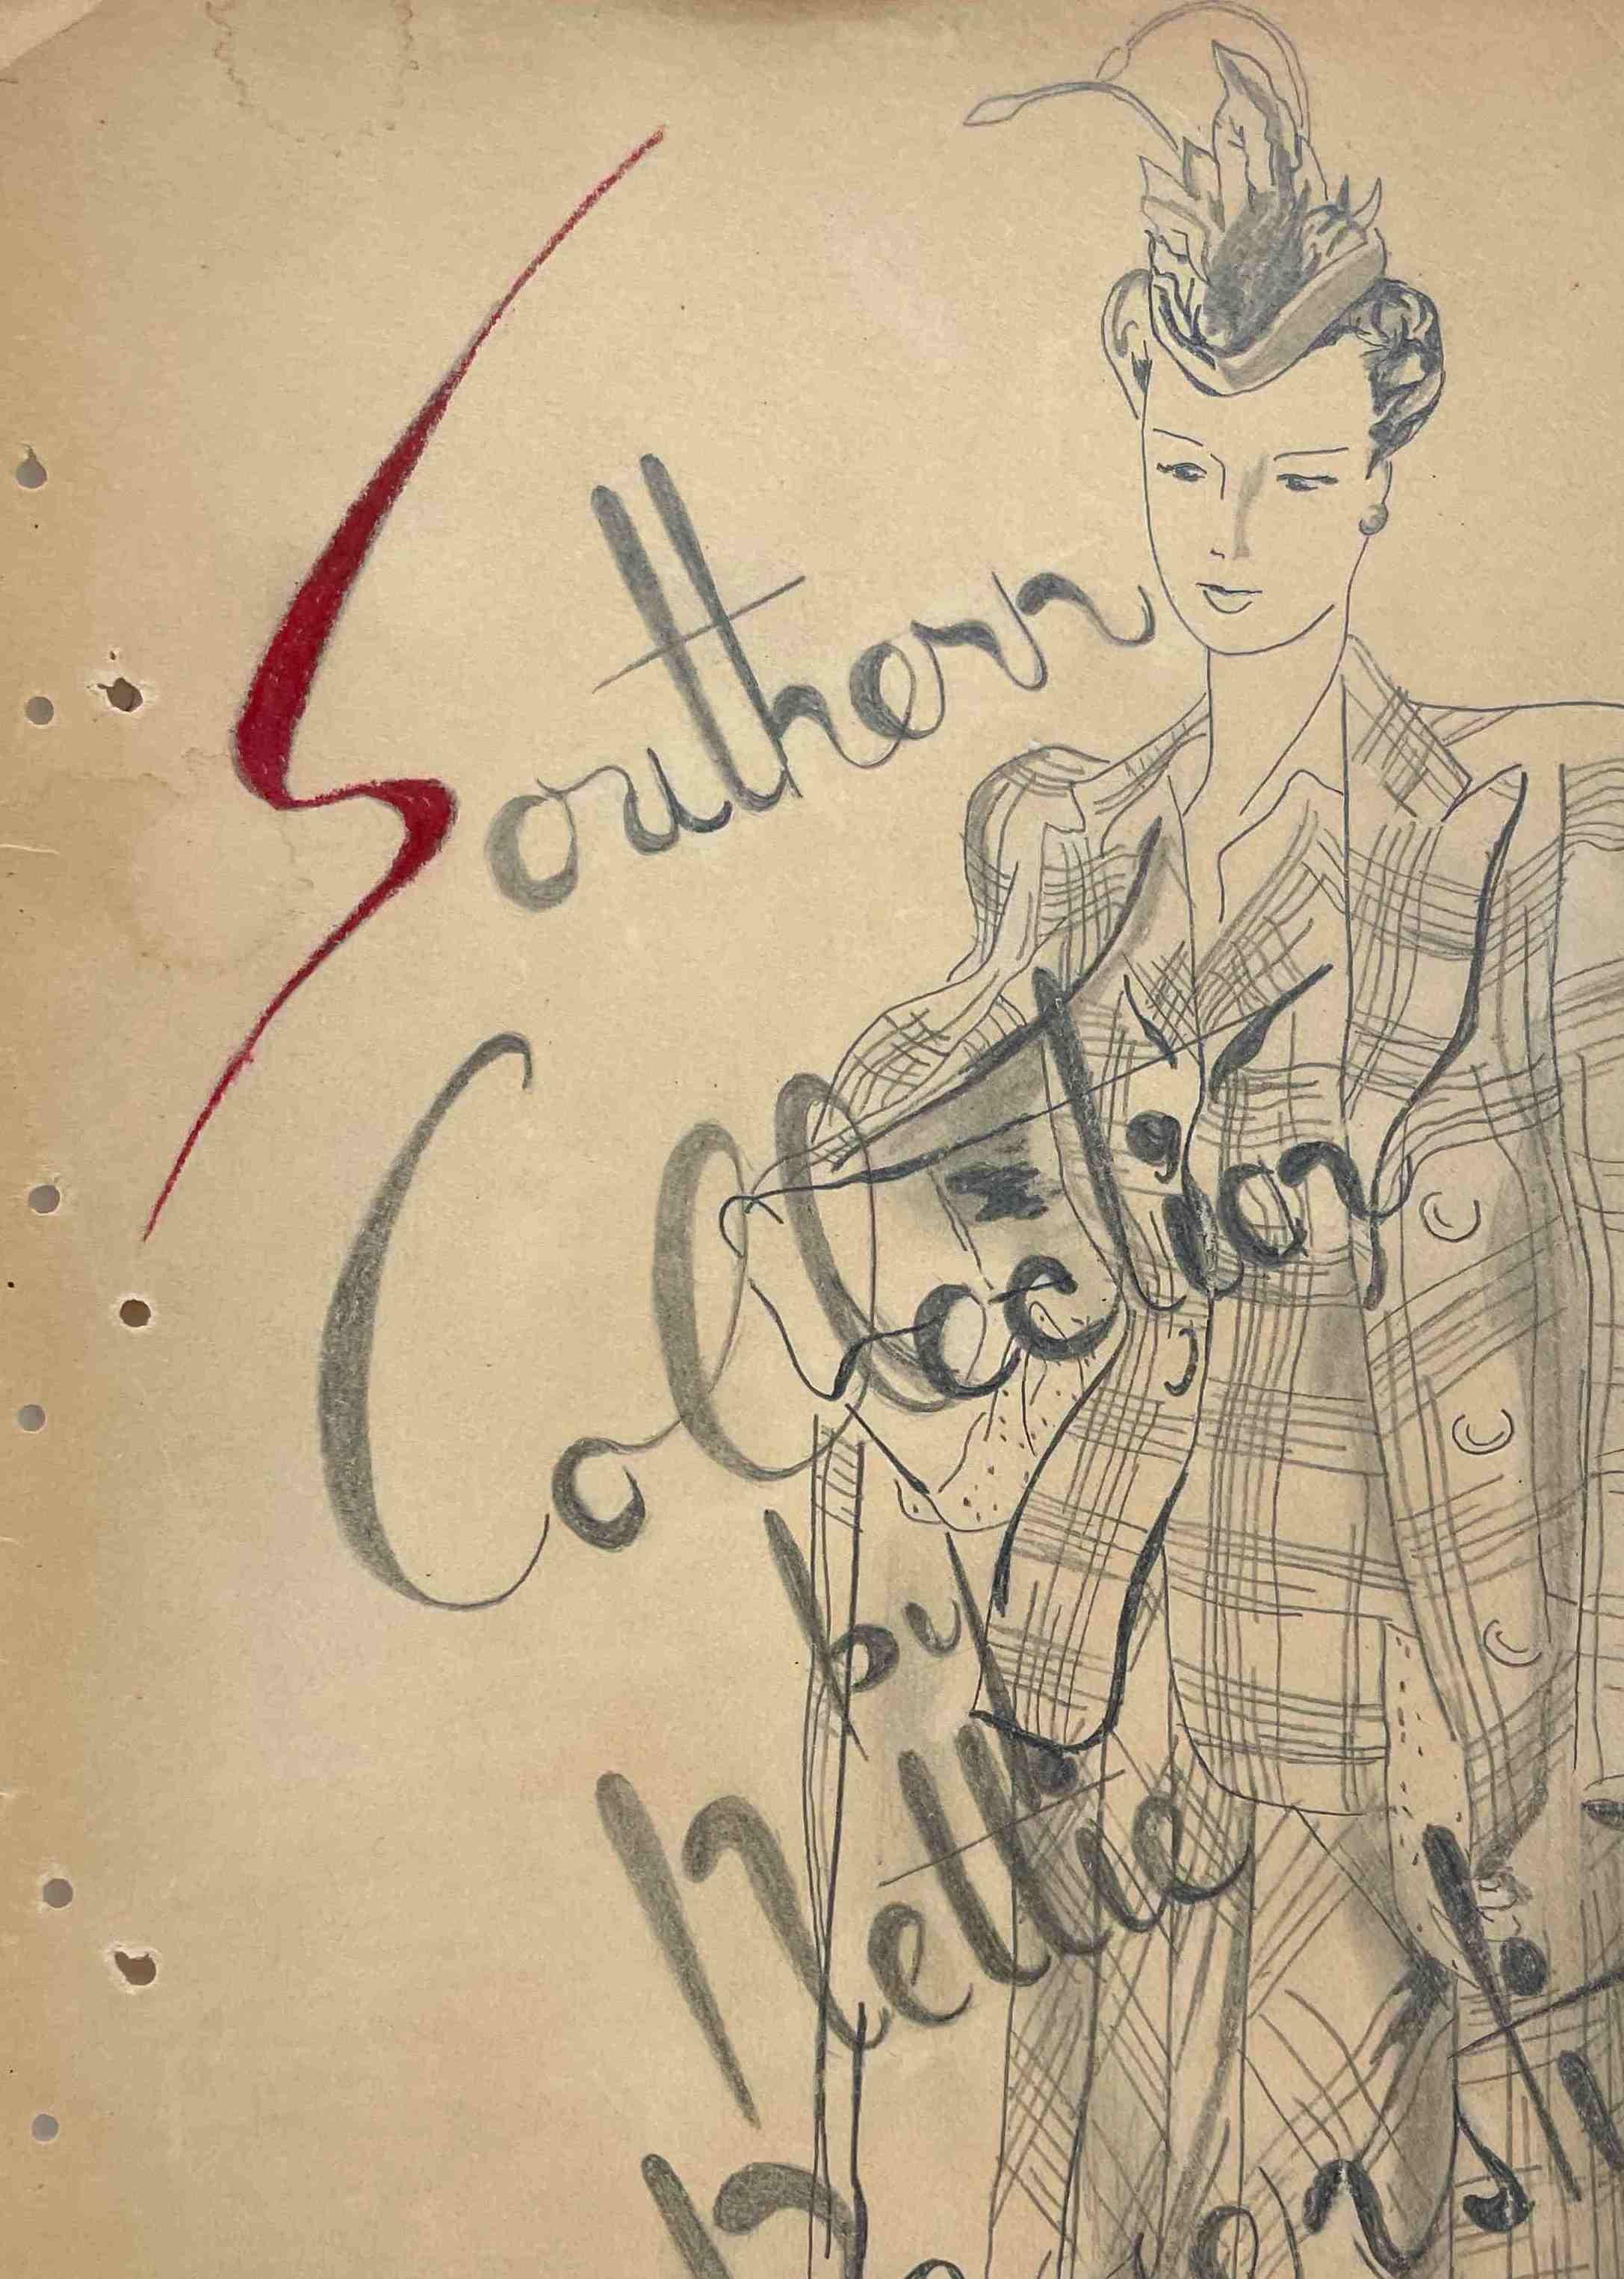 An early 1940s fashion study featuring and advertisement for Marshall Field & Company featuring the 